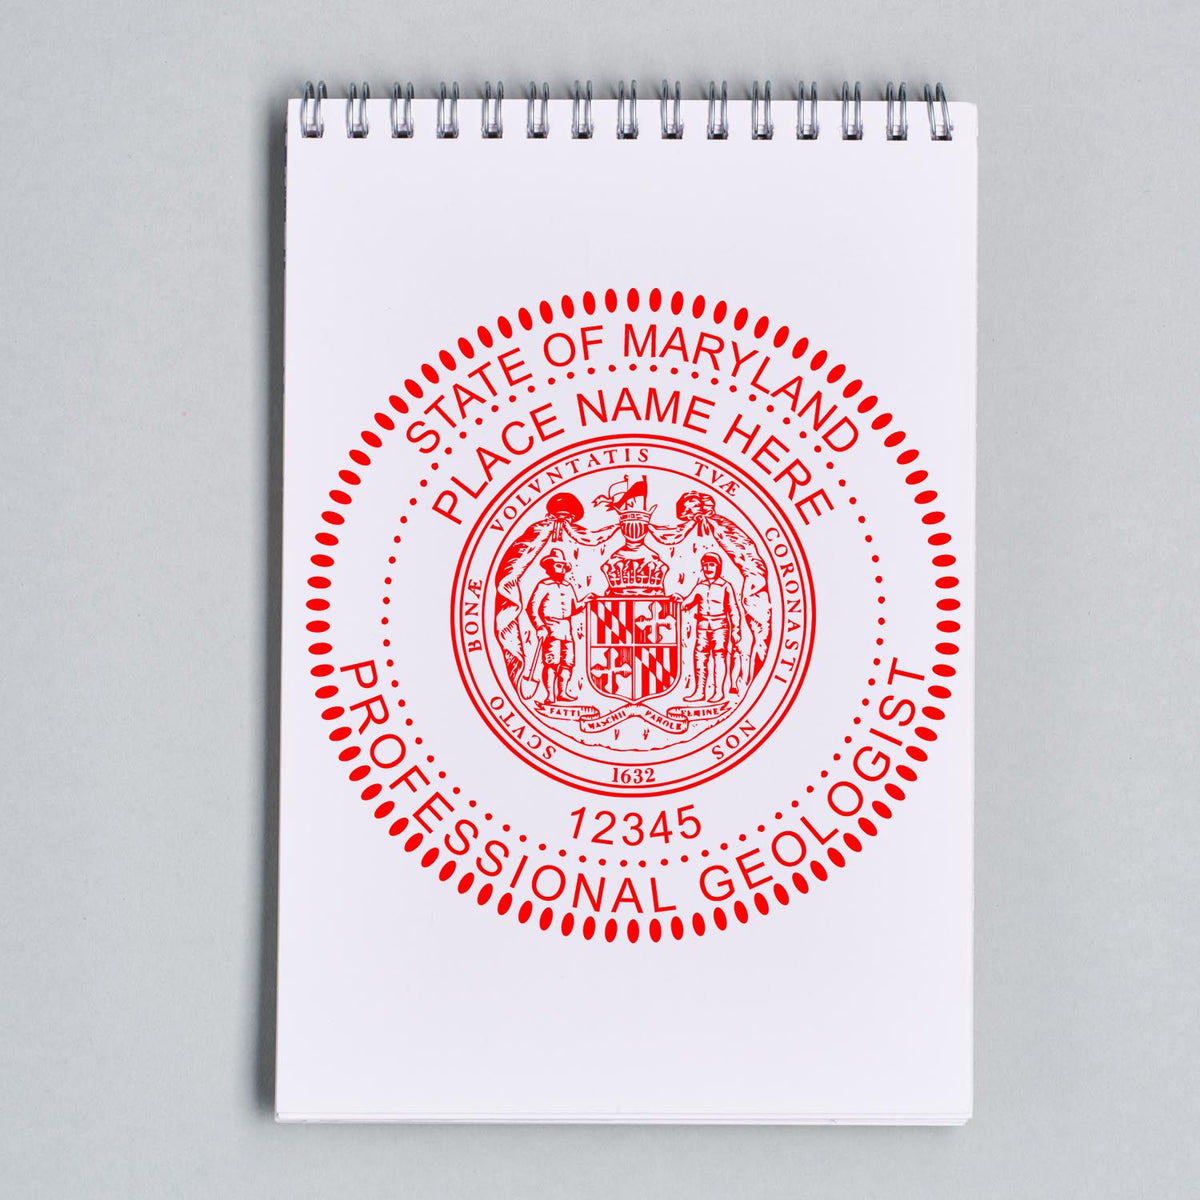 The Digital Maryland Geologist Stamp, Electronic Seal for Maryland Geologist stamp impression comes to life with a crisp, detailed image stamped on paper - showcasing true professional quality.